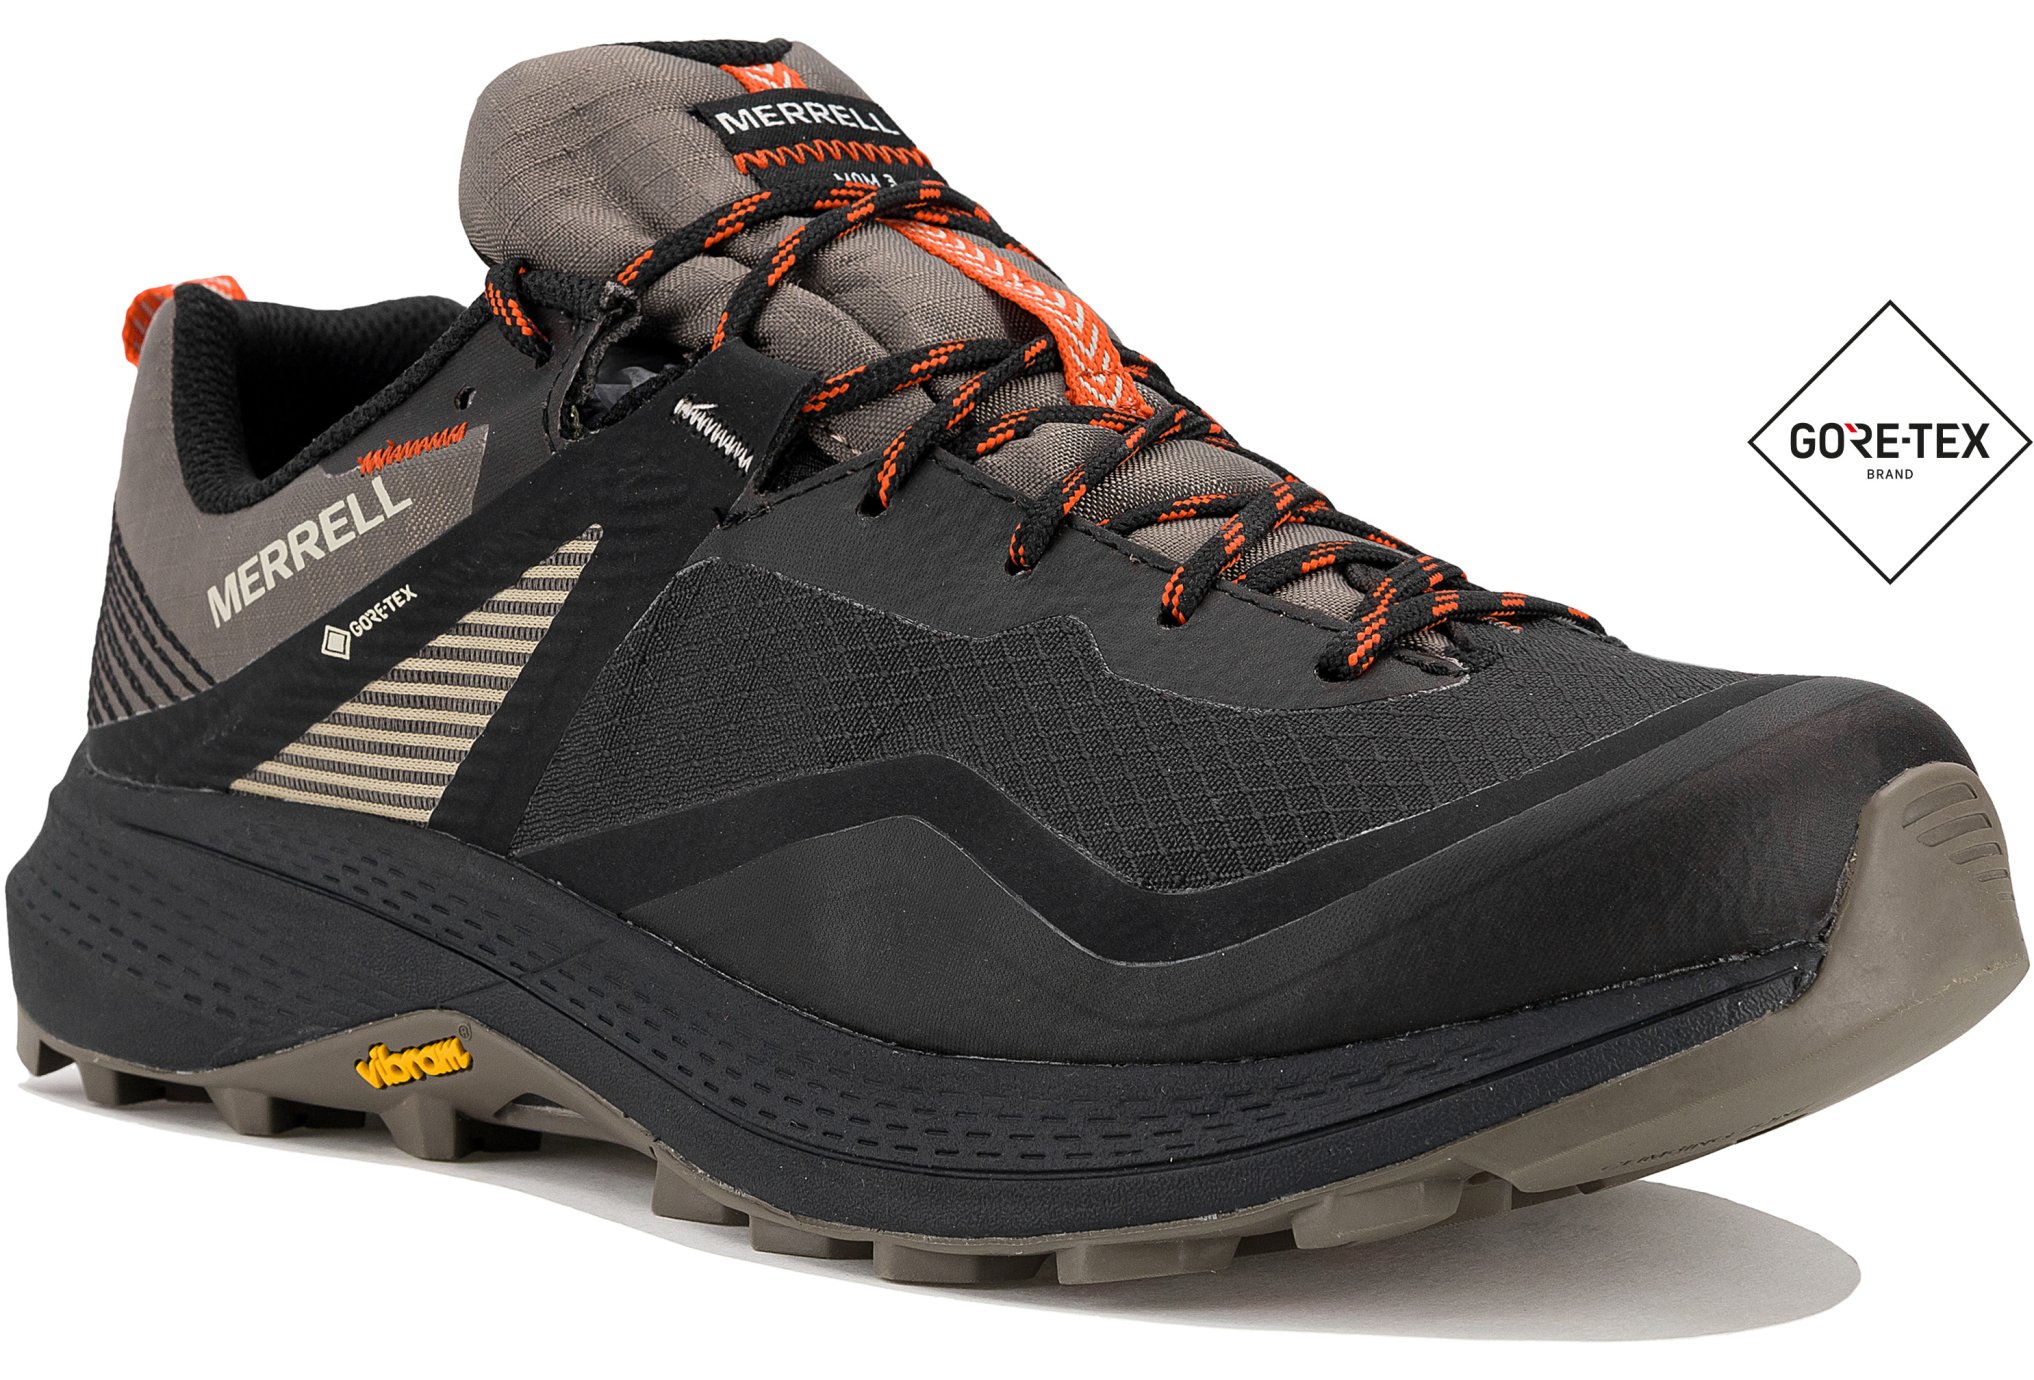 Merrell MQM 3 Gore-Tex M Chaussures homme déstockage